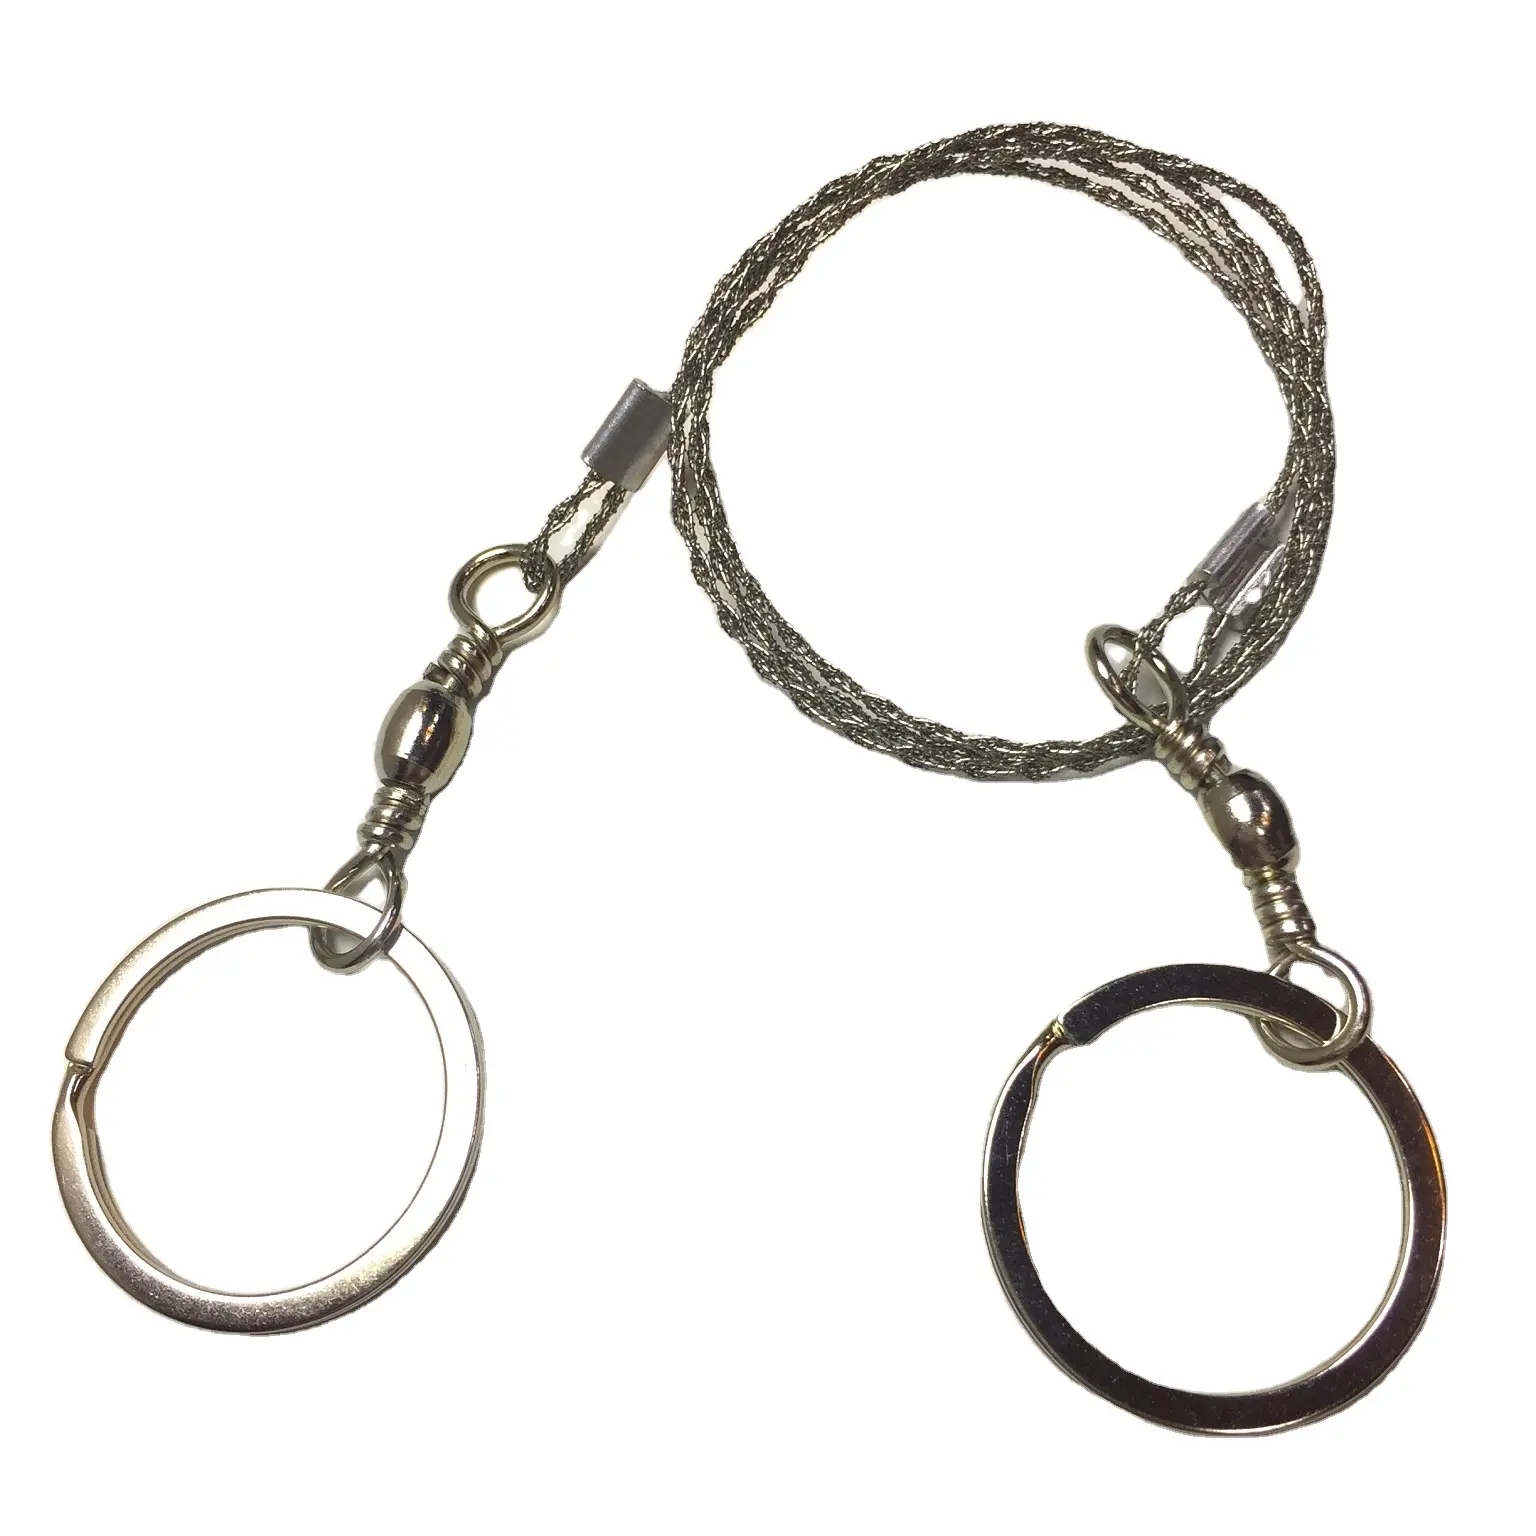 Outdoor Emergency Rescue Gear Stainless Steel Wire Saw Hand Chain Scroll Saw Survival Tools